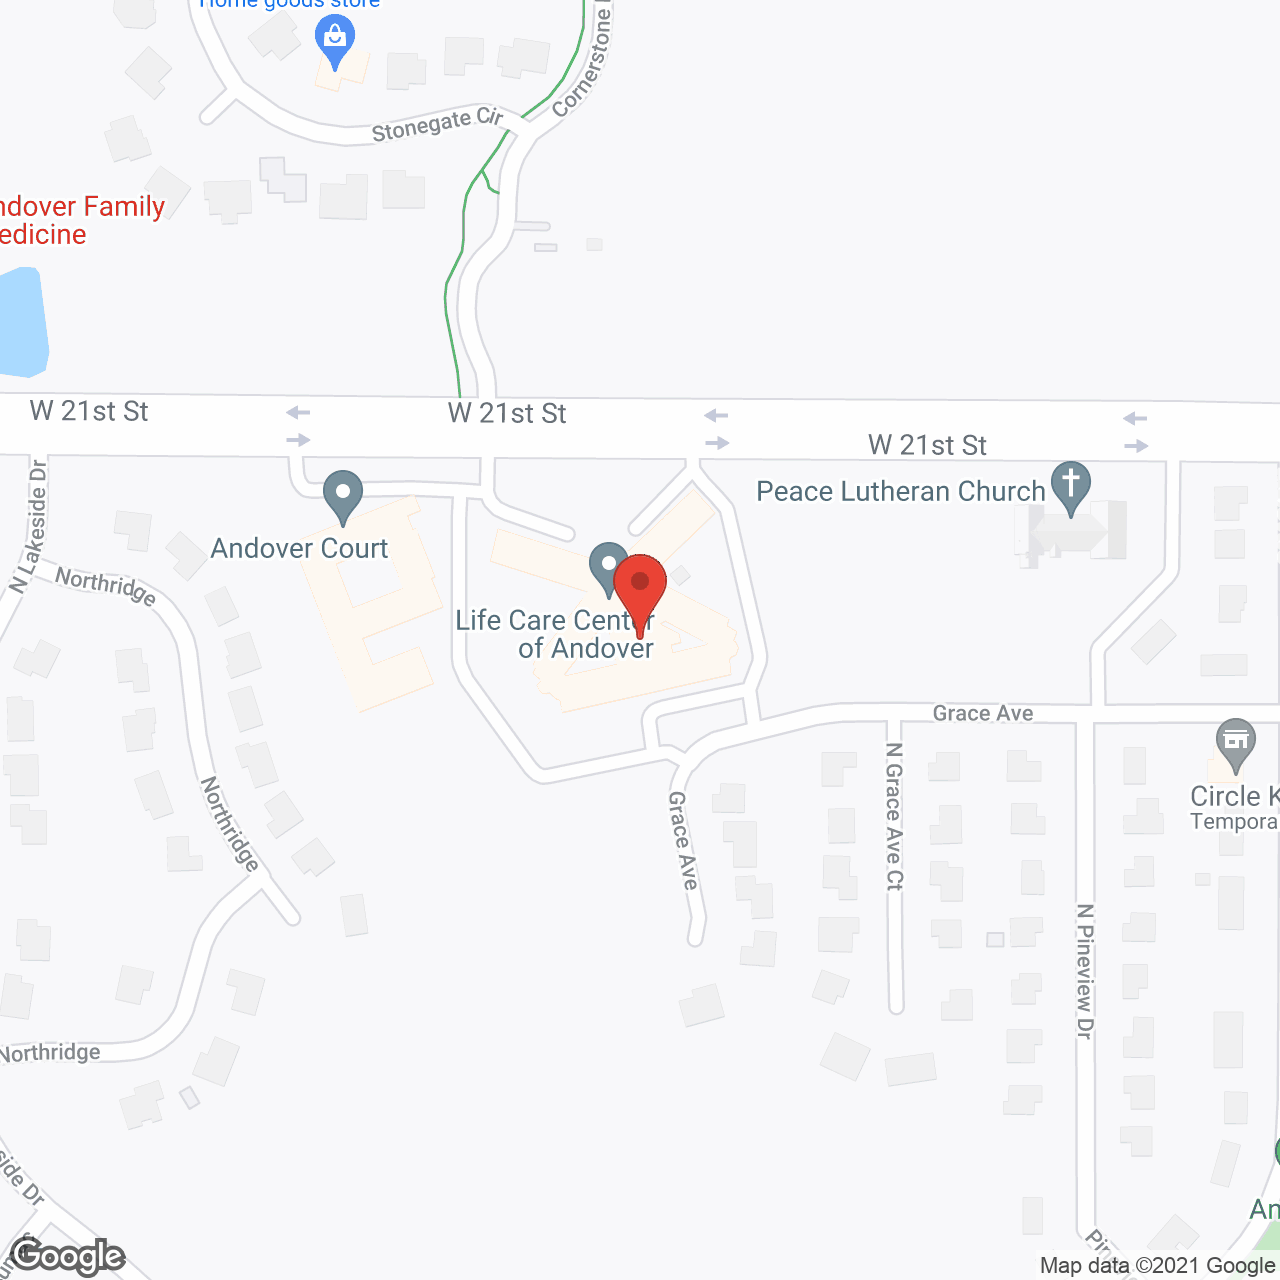 Life Care Center of Andover in google map